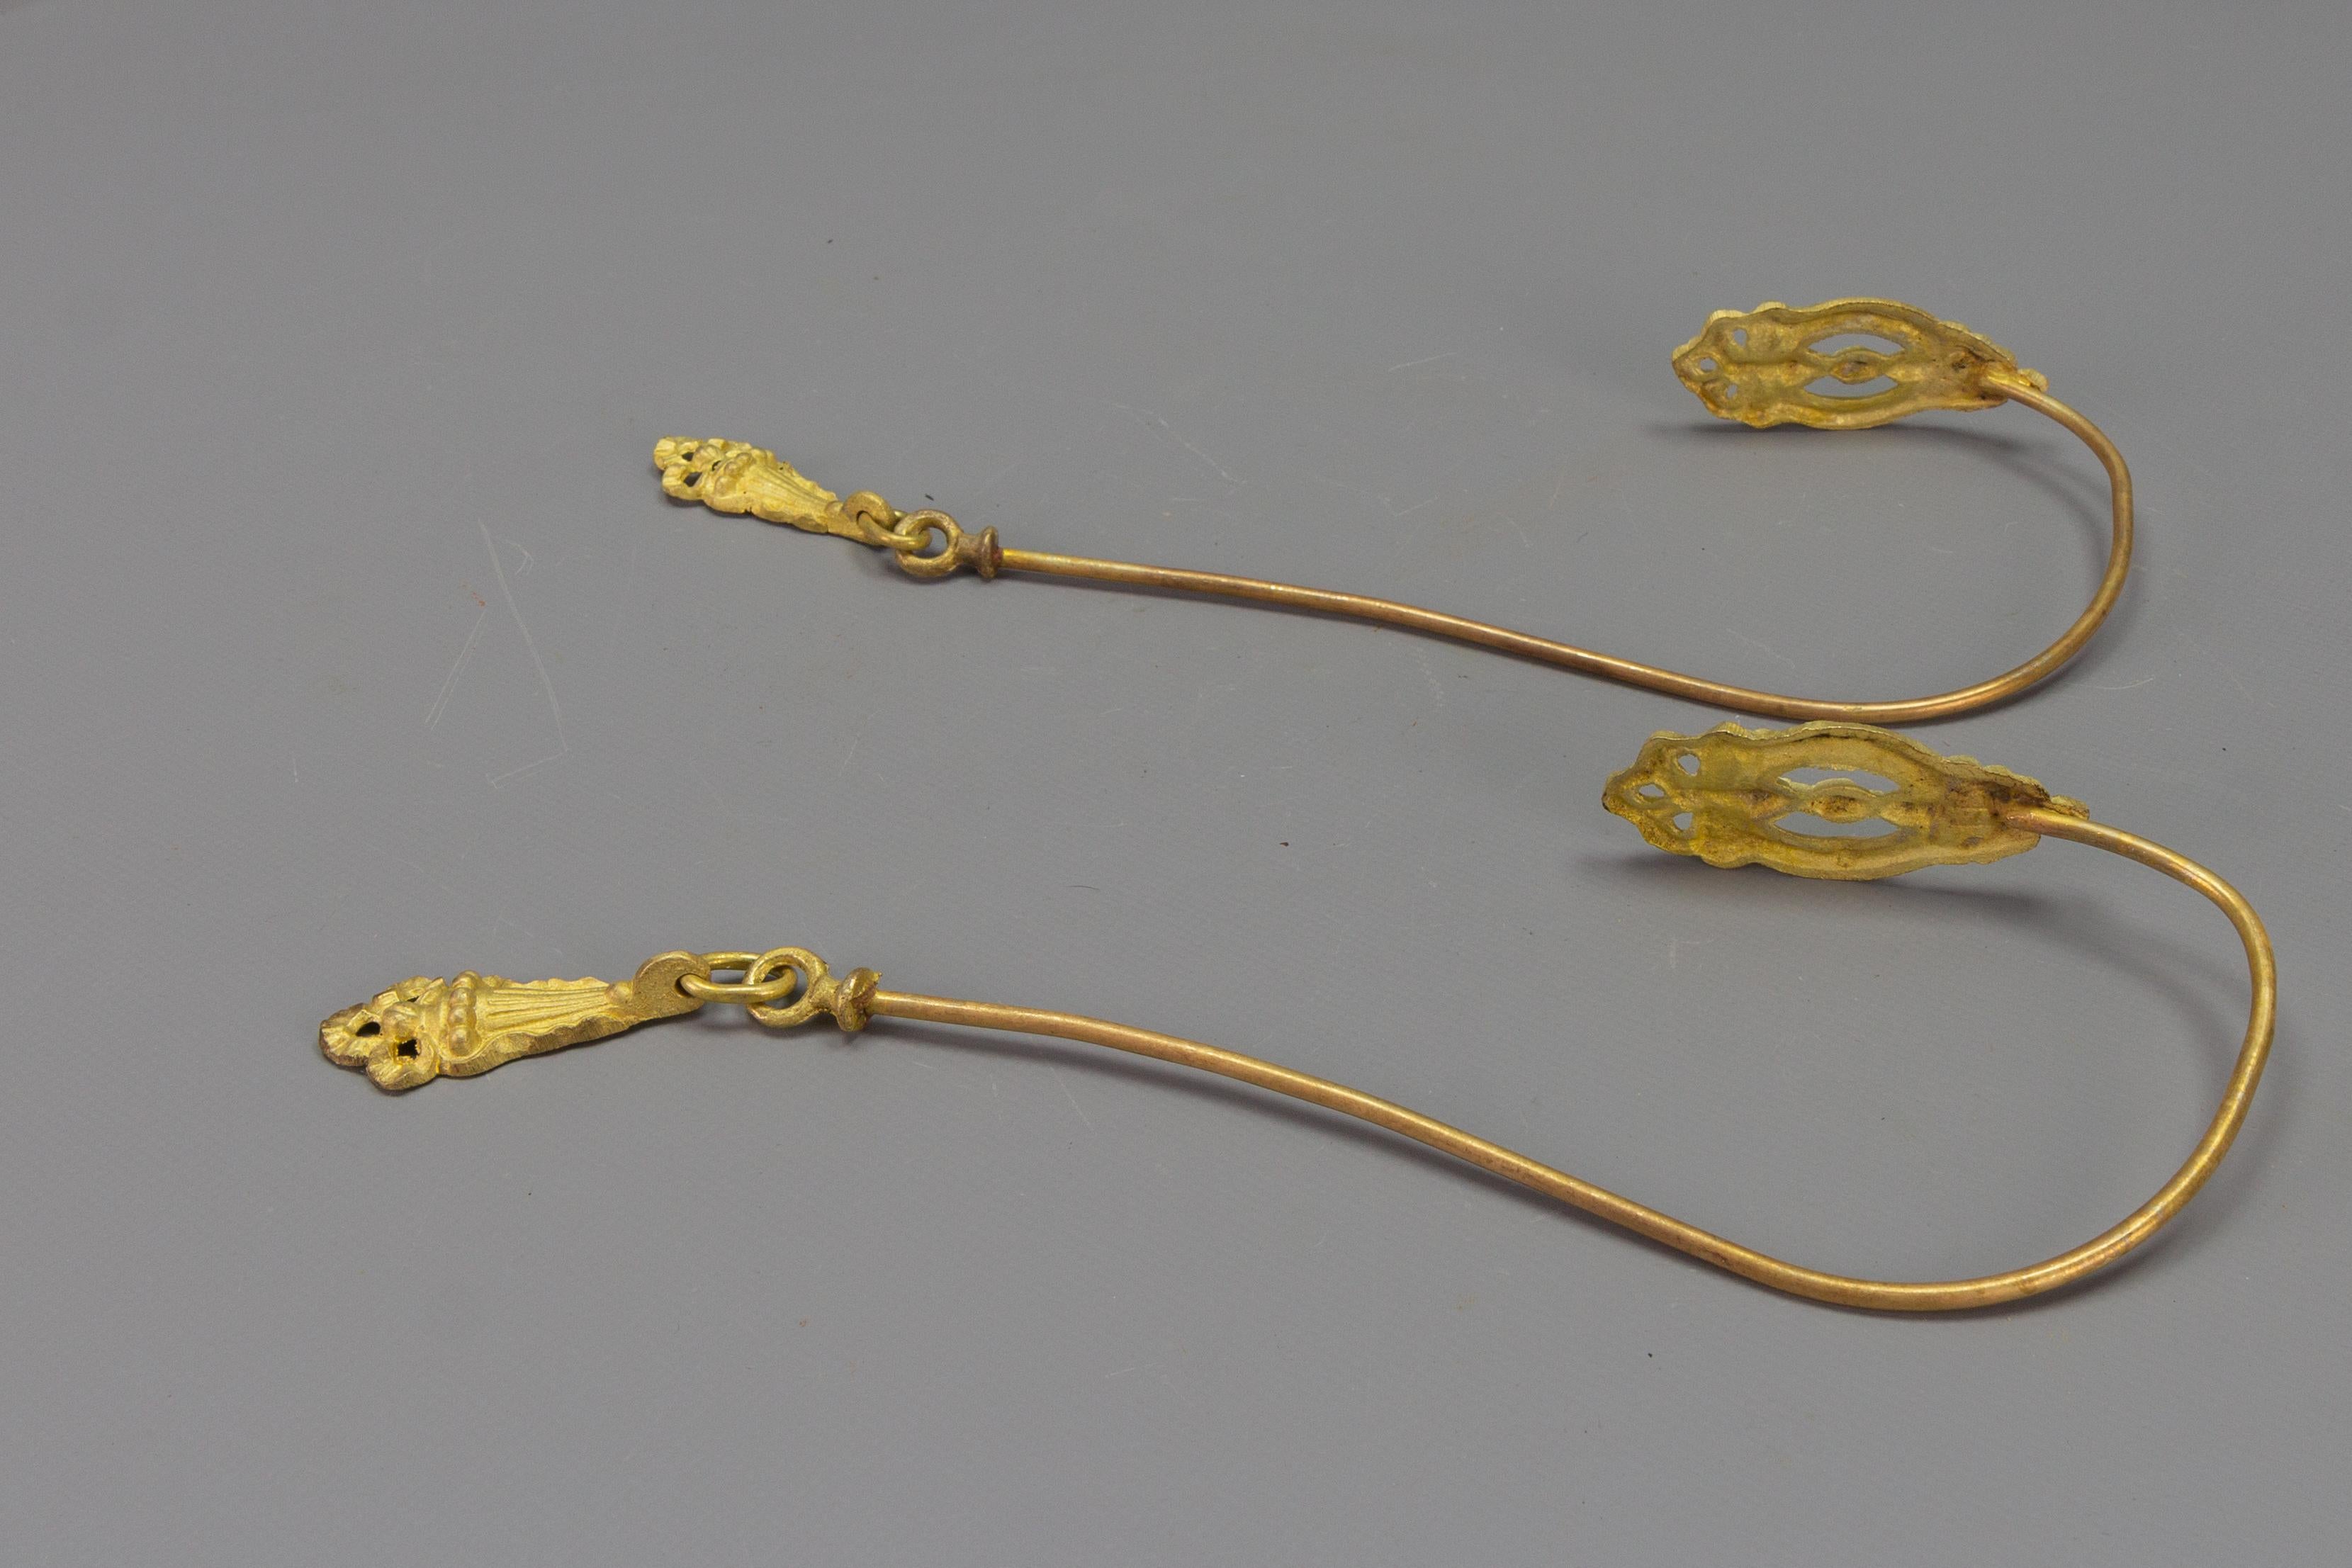 Pair of French Bronze and Brass Curtain Tiebacks or Curtain Holders, ca. 1920 For Sale 3